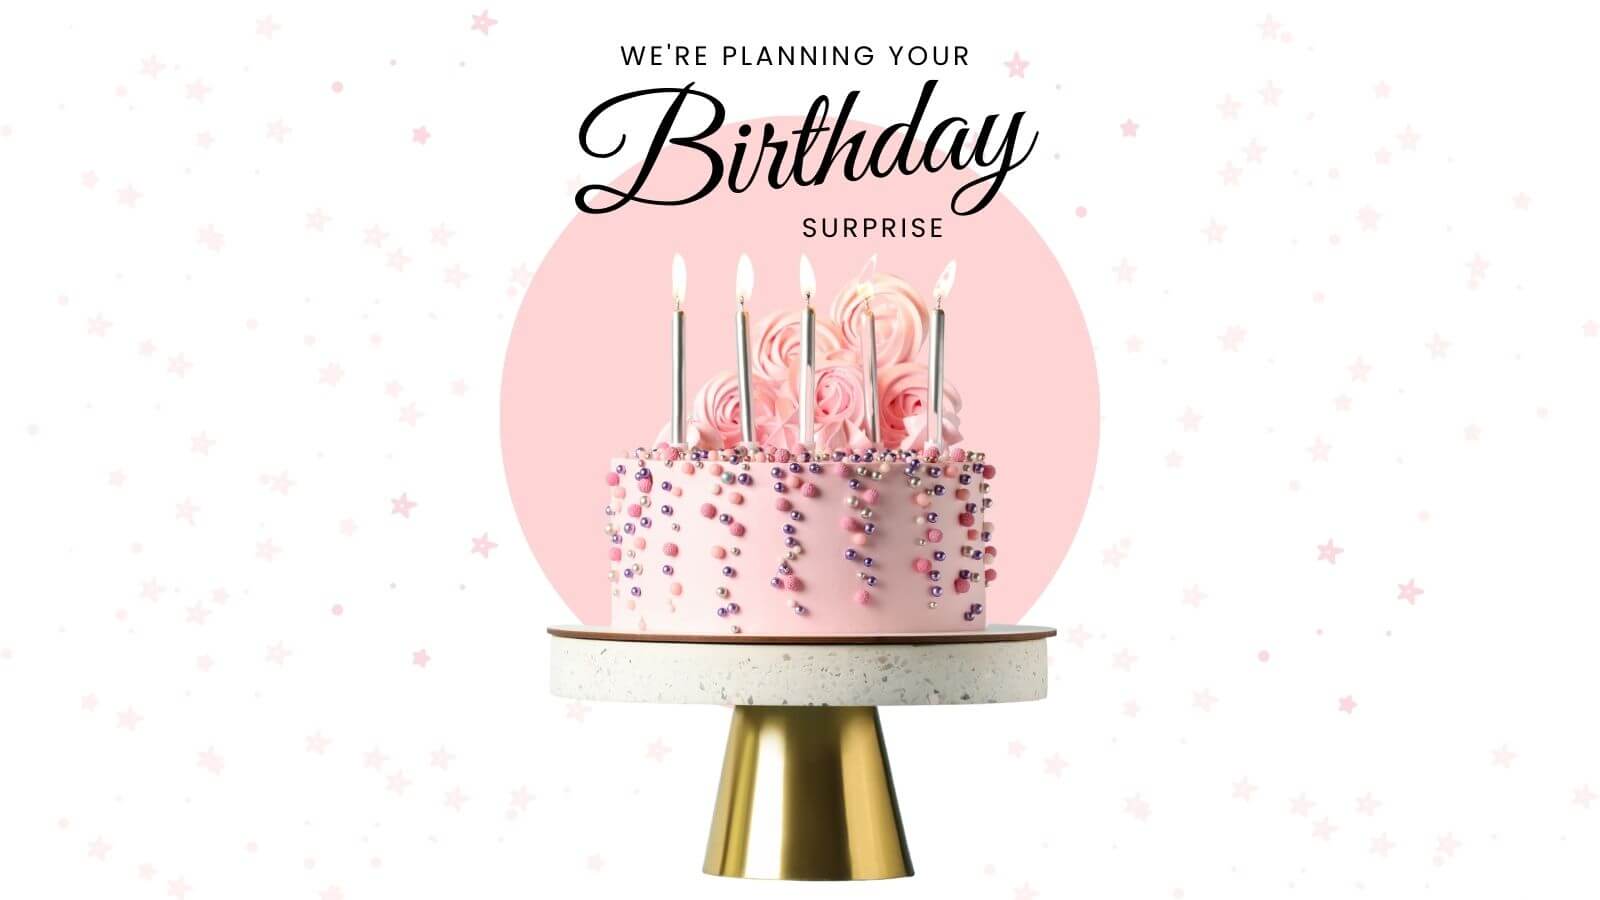 Join birthday club home decorating newsletter at Beautiful Home Decor